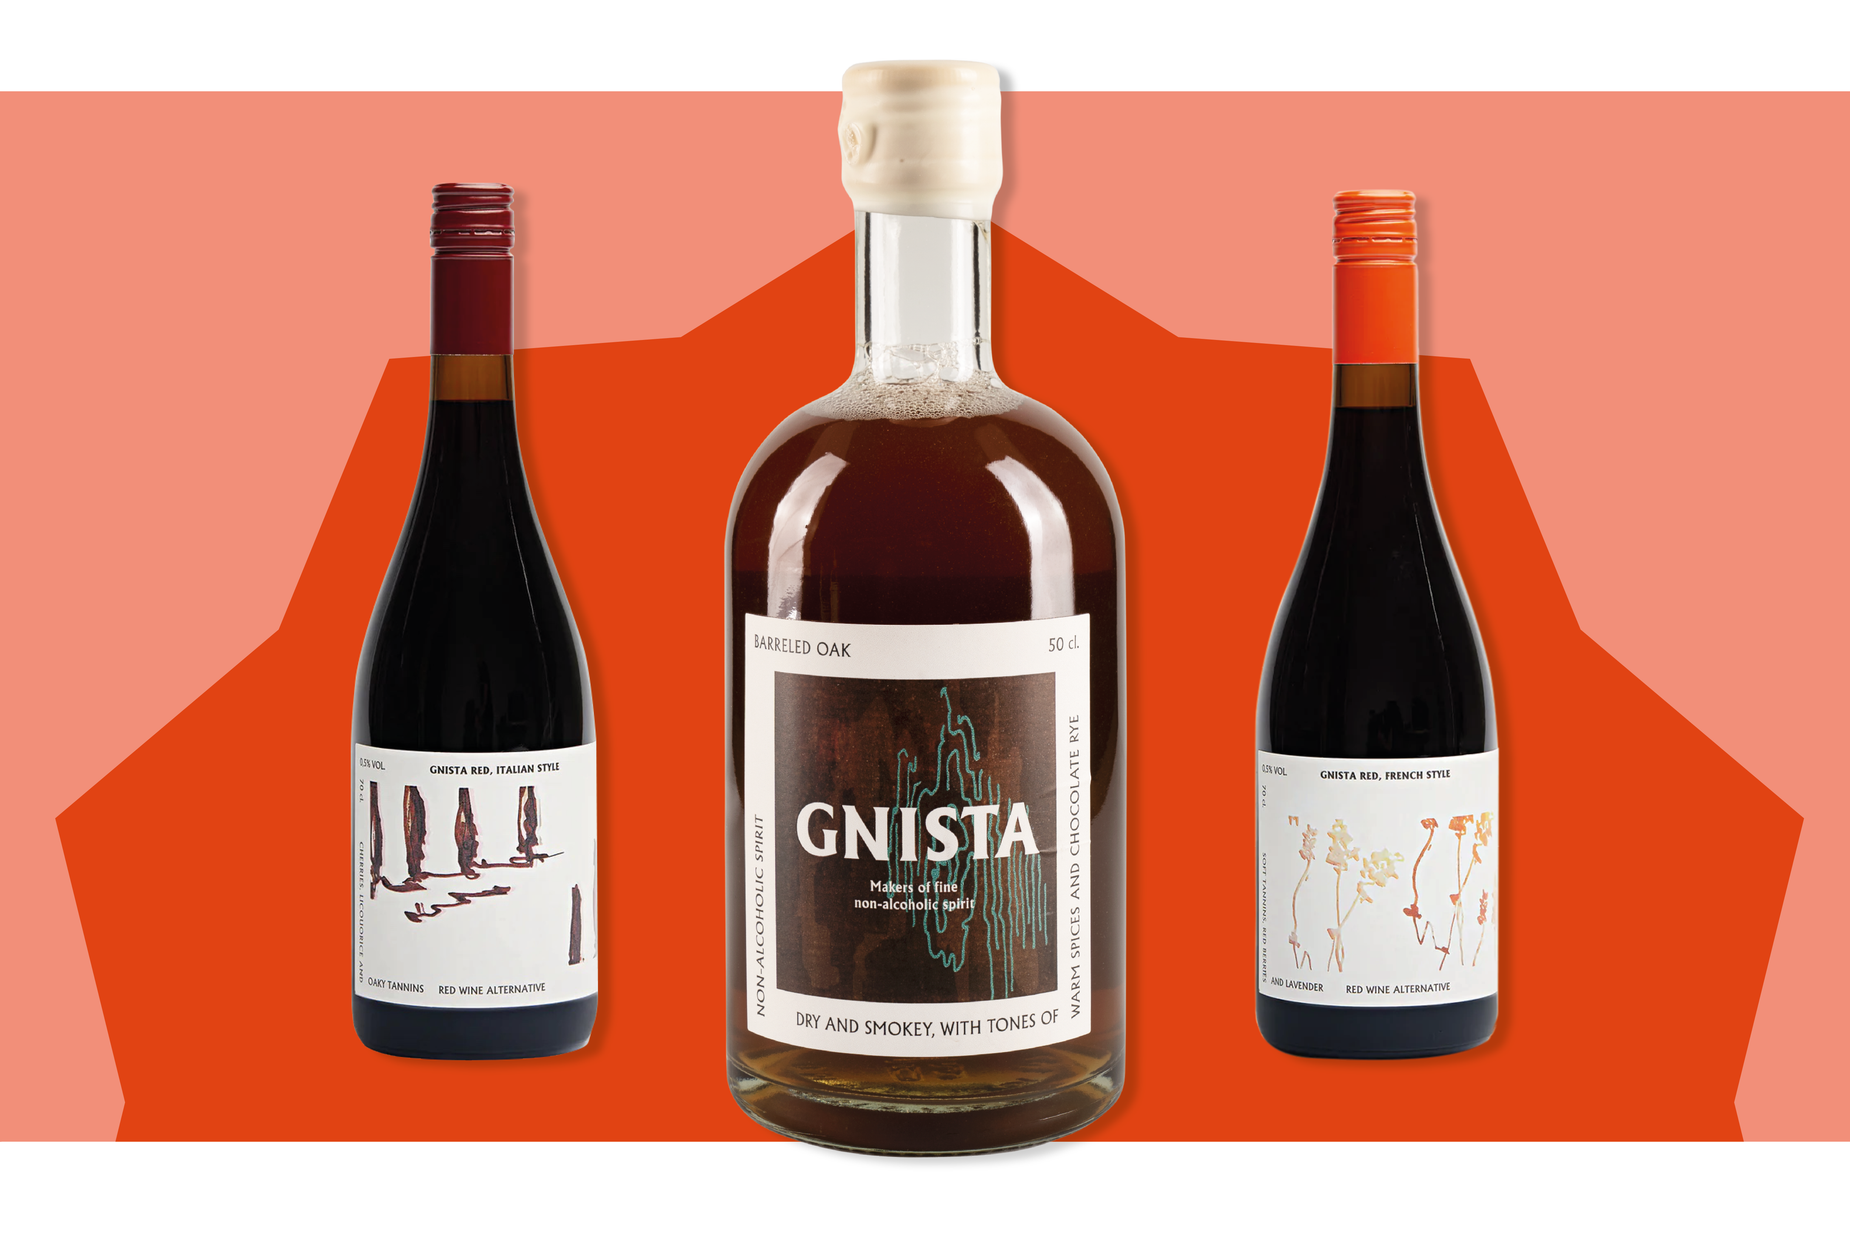 Introducing Gnista - Sweden's Answer to Mindful Drinking